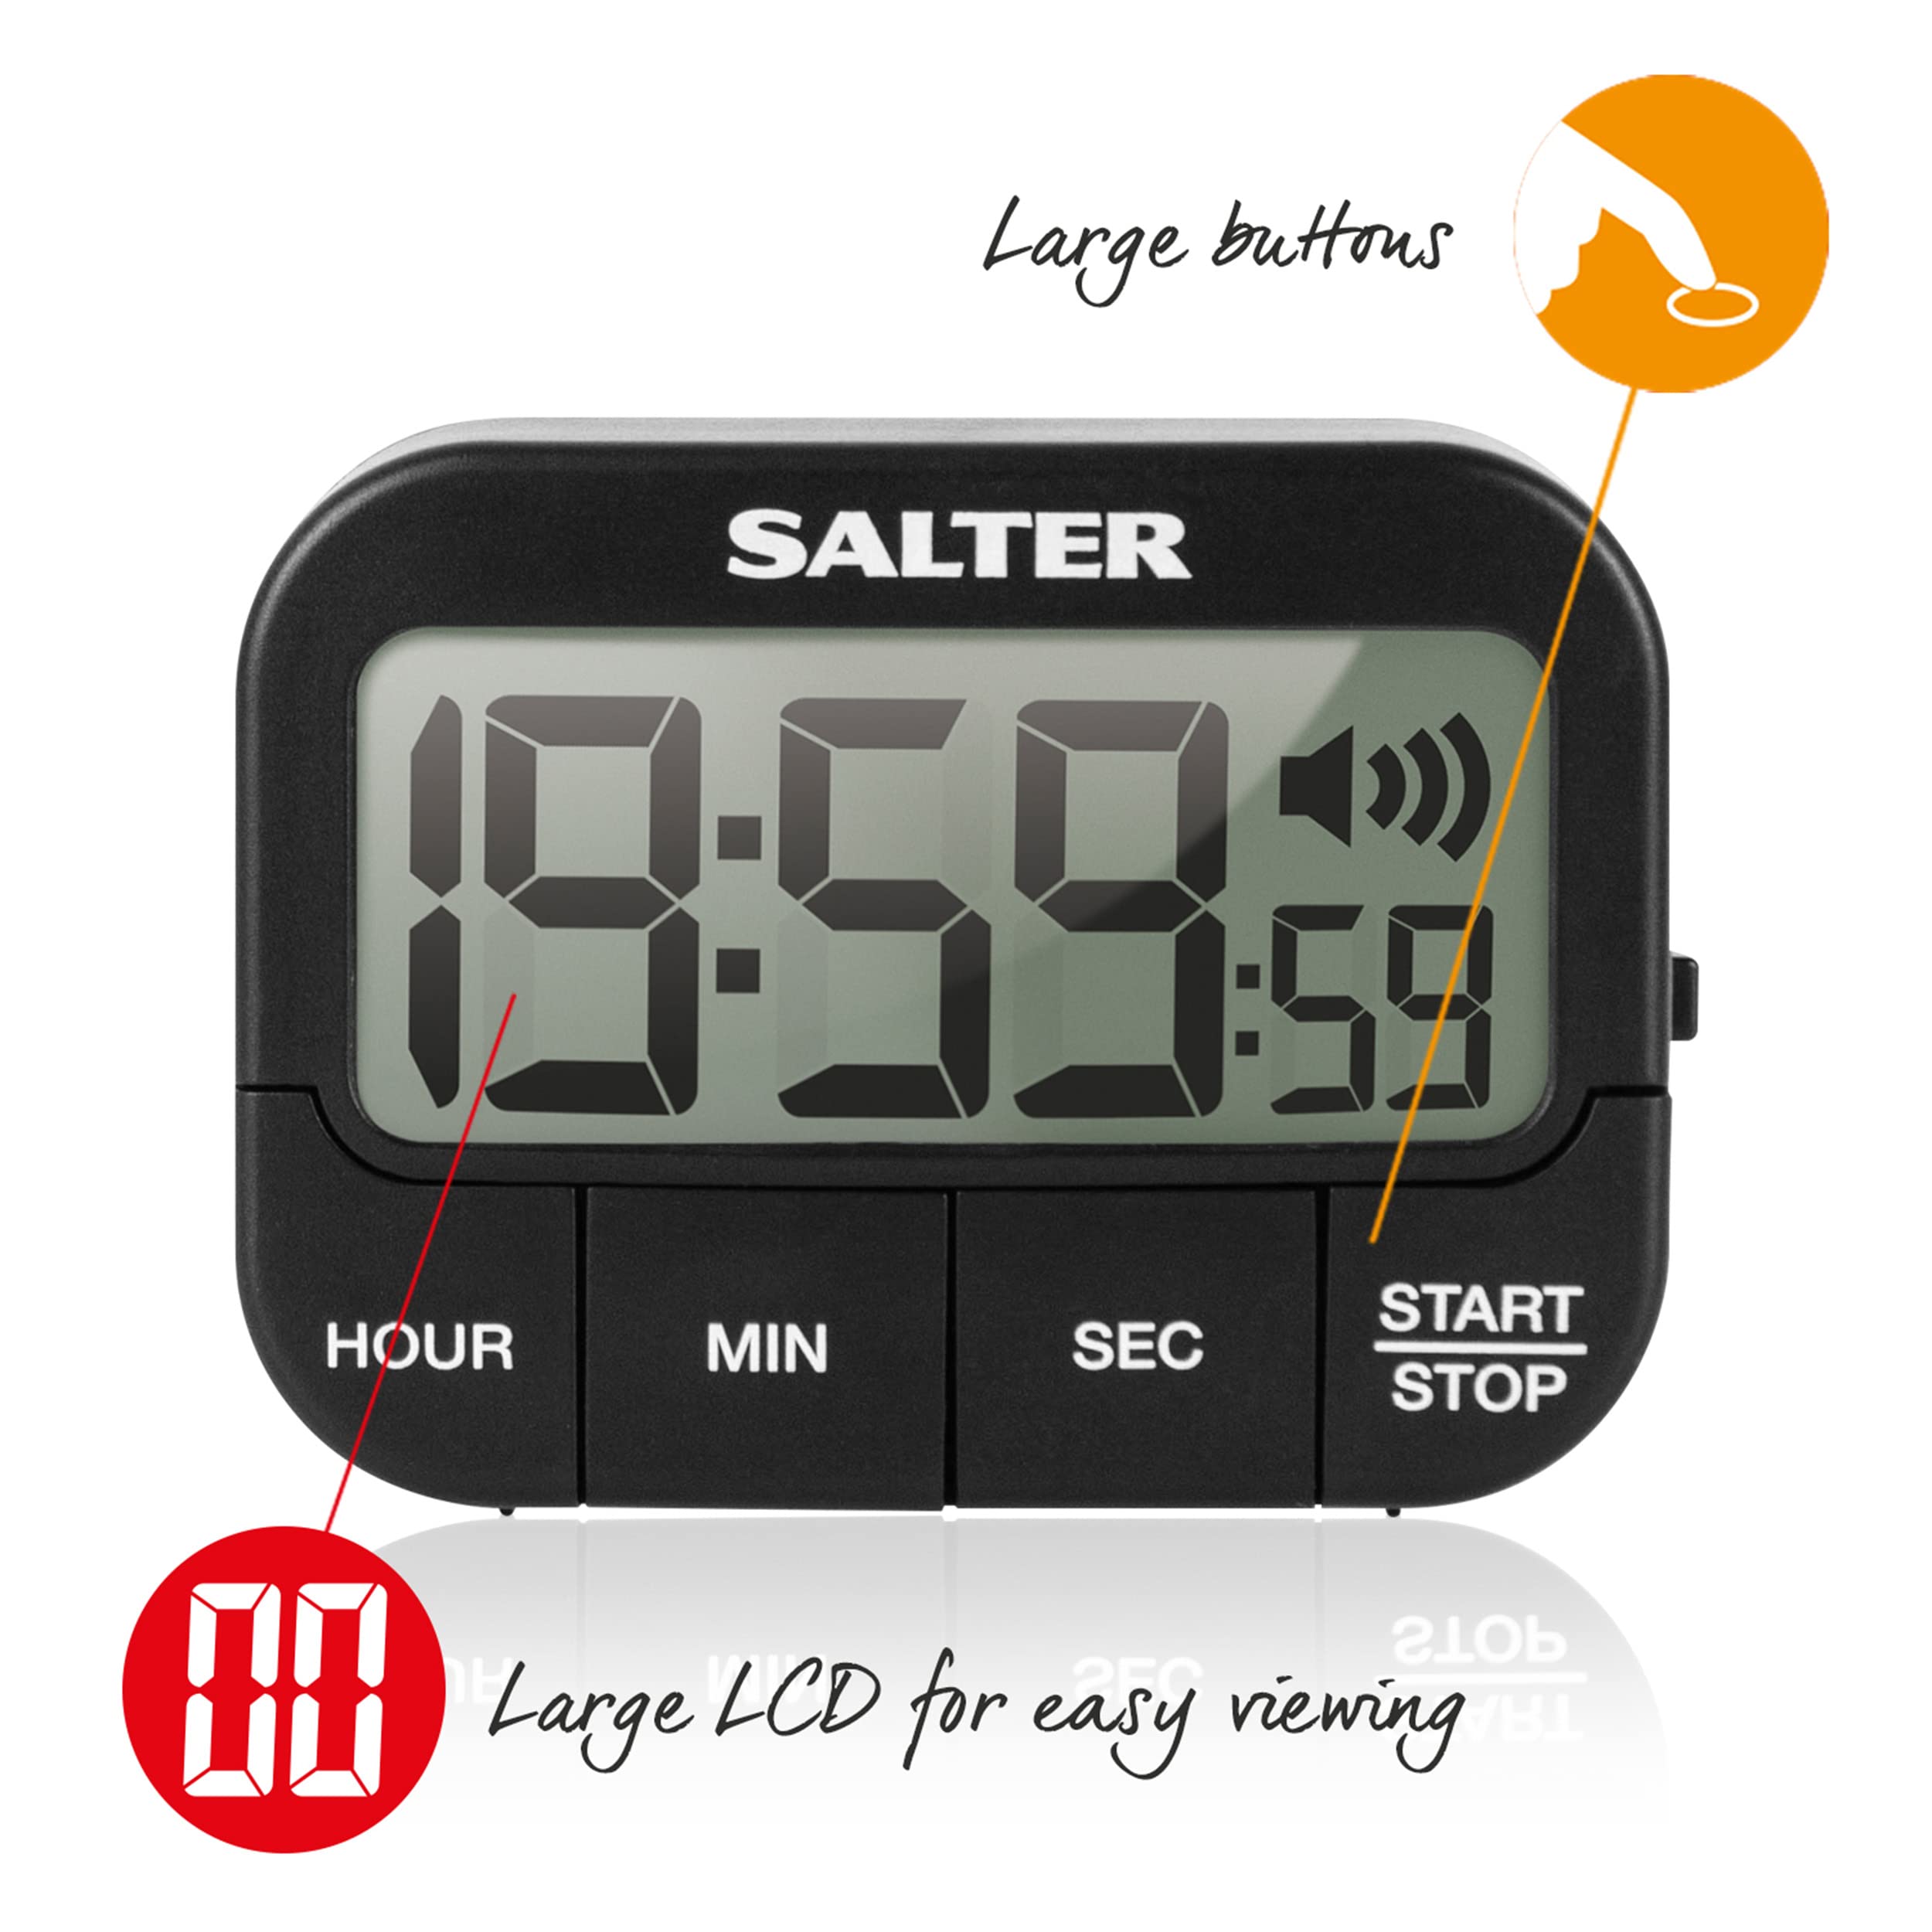 Salter Kitchen Digital Display Count up or Countdown Timer, Adjustable Loud Beeper, Large Start/Stop Button, Memory Function, Magnetic or Self Standing-Black, Plastic